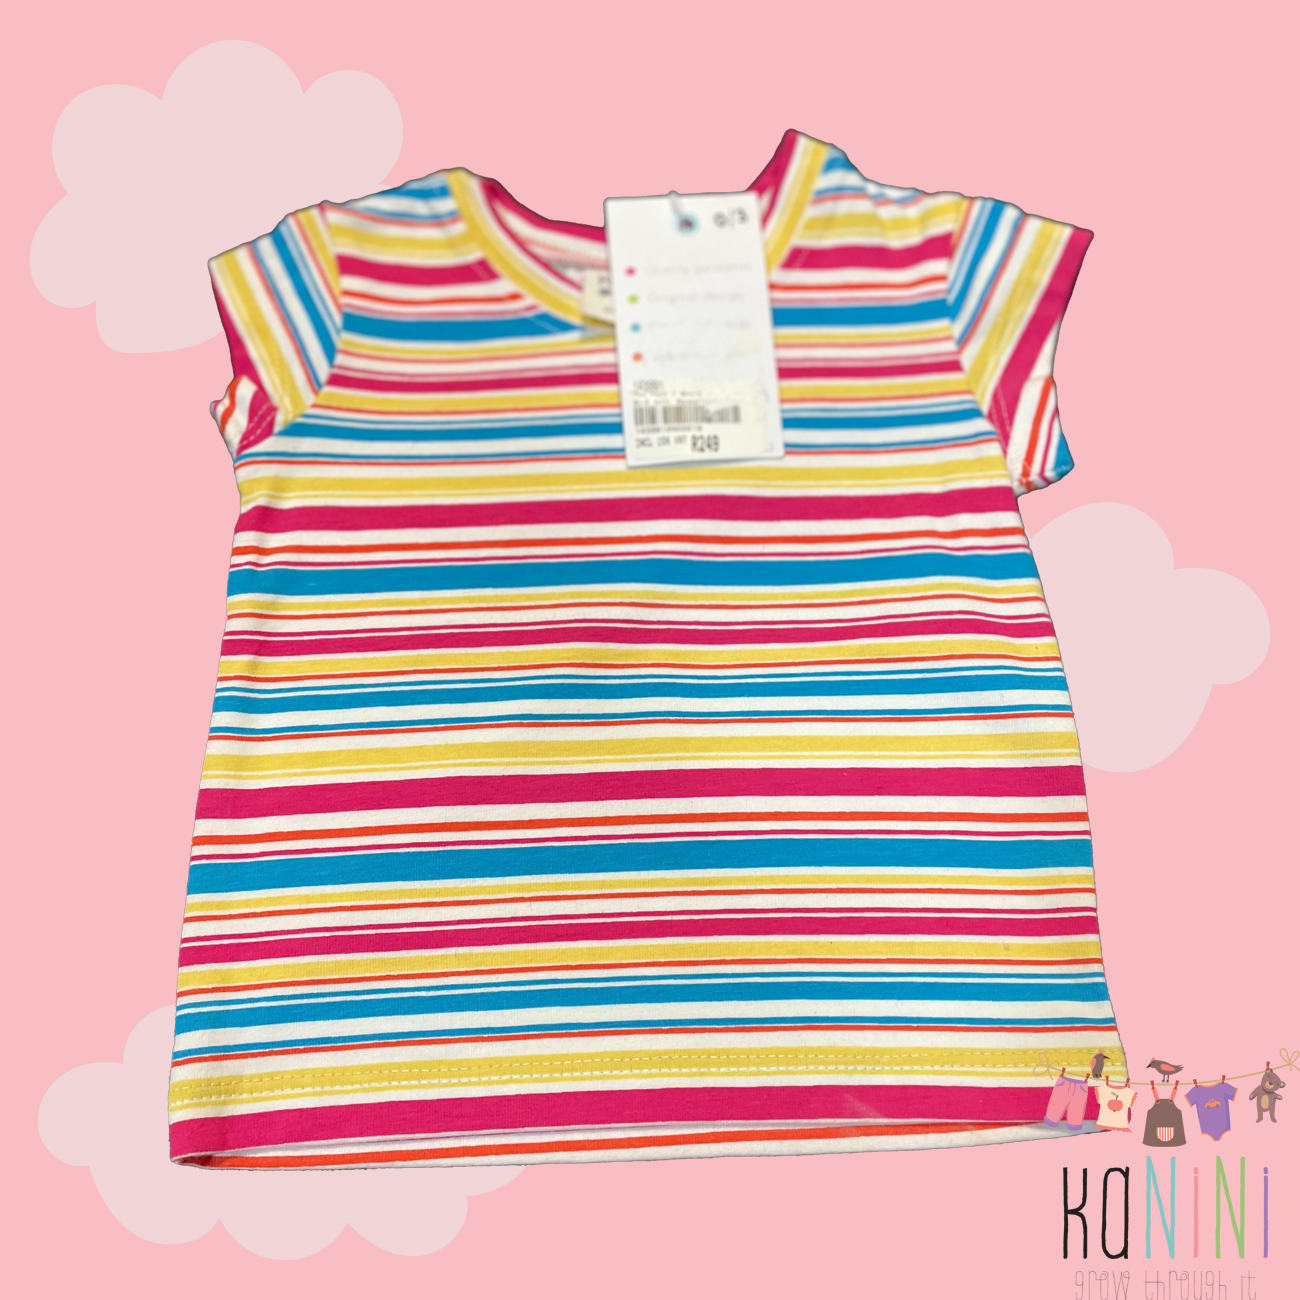 Featured image for “Keedo 0 - 3 Months Girls Candy Stripe t-Shirt”